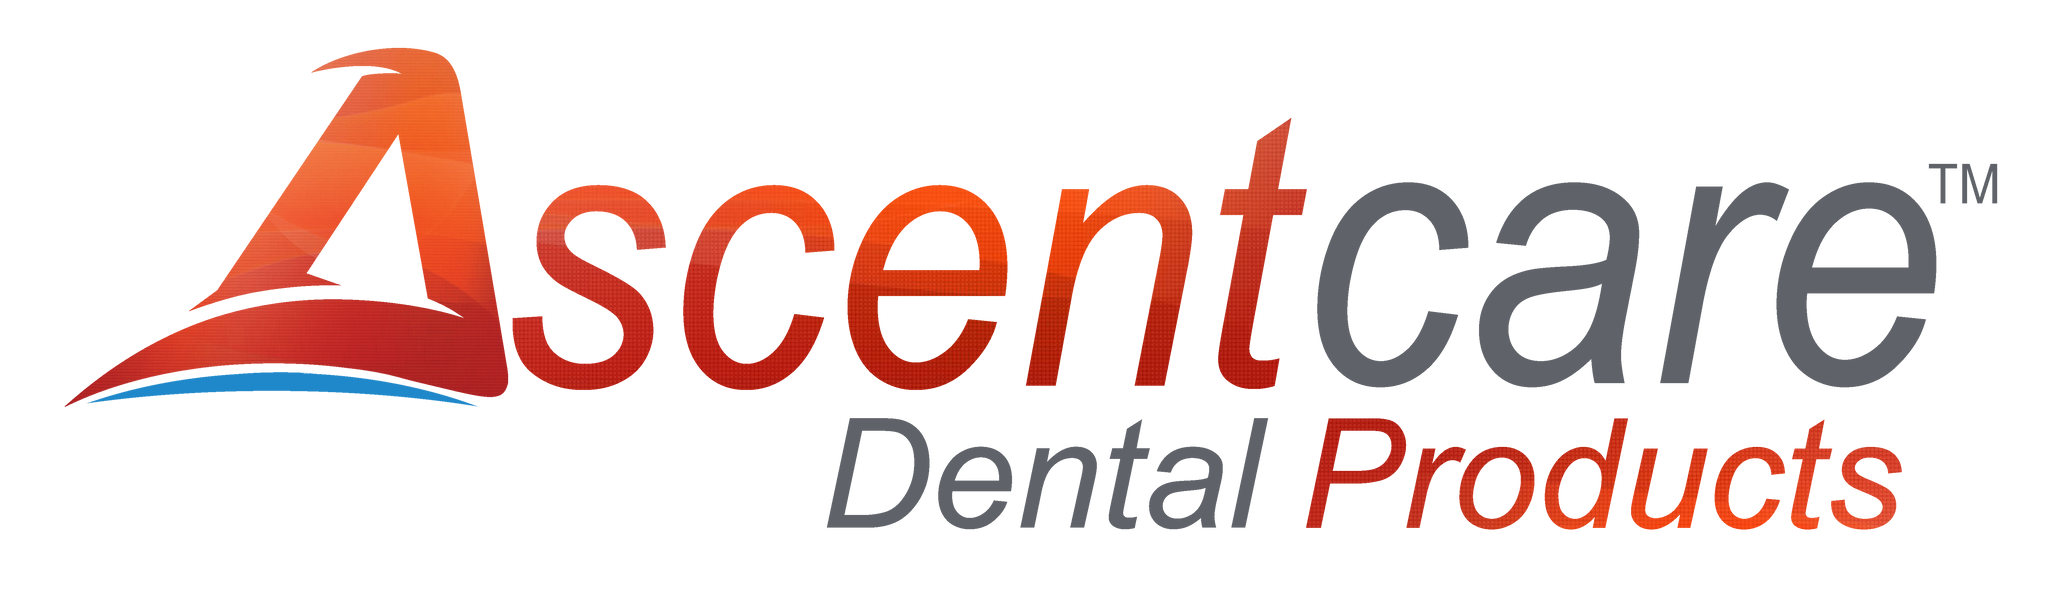 Curion (formerly, Bisco Canada) is the only authorized and exclusive distributor of Ascentcare Dental Products in Canada. All Ascentcare products sold by Curion are backed by the manufacturers warranty.